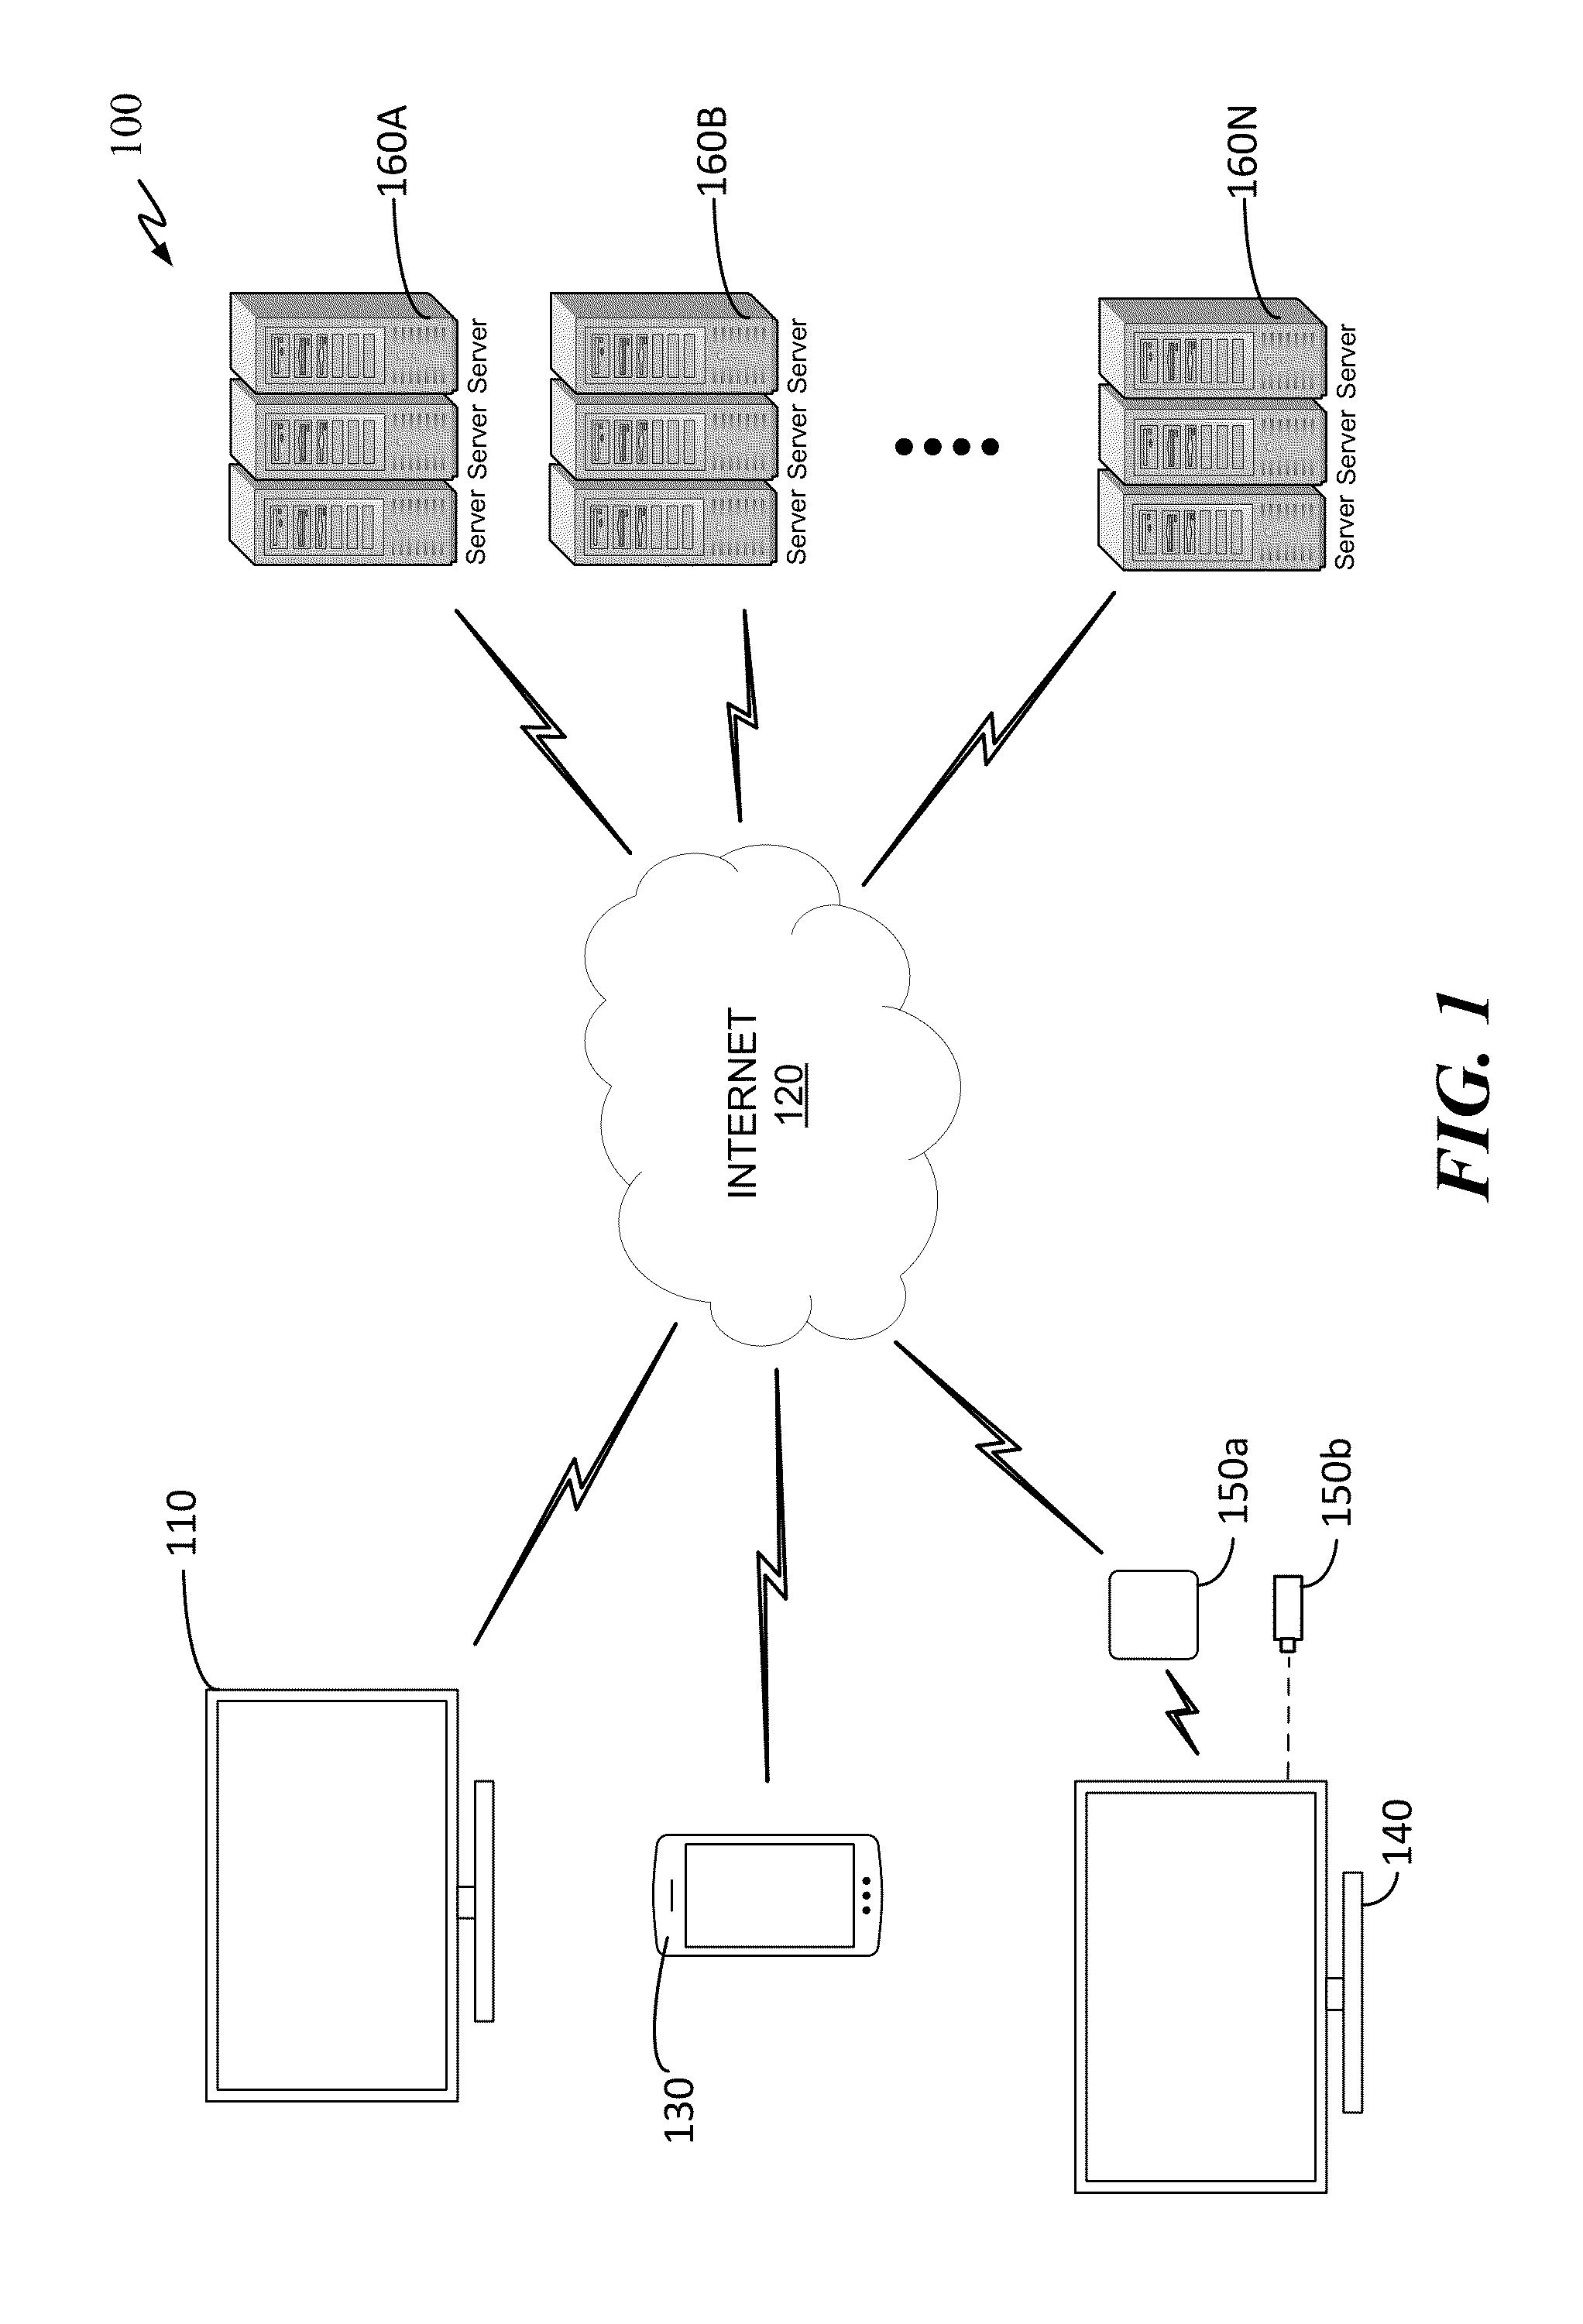 System and method for searching multimedia